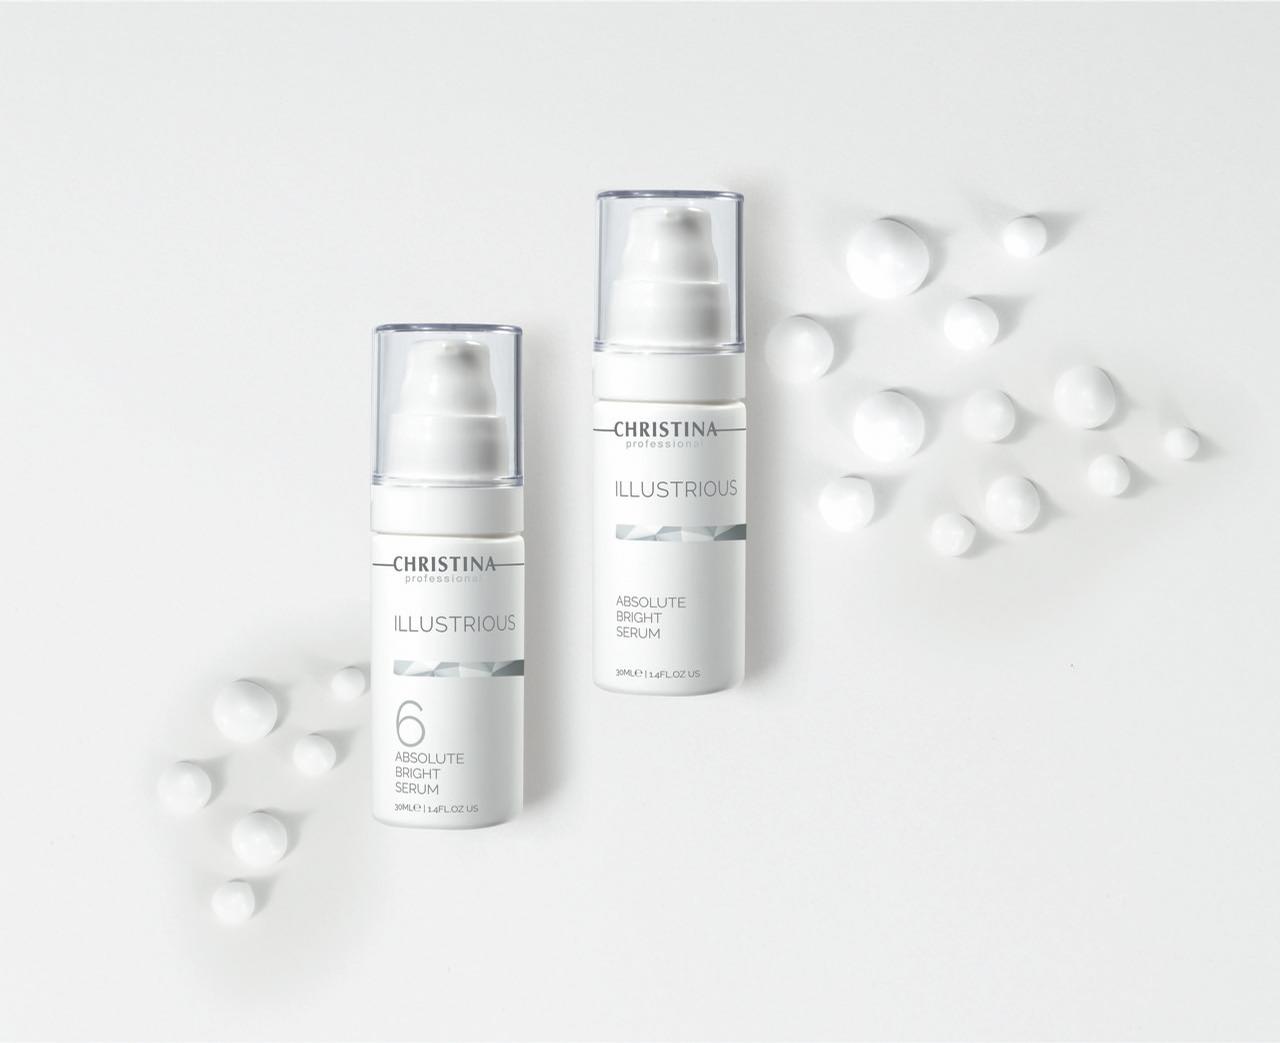 Illustrious contains potent whitening, brightening and firming active ingredients to target age spots and refine tone / 